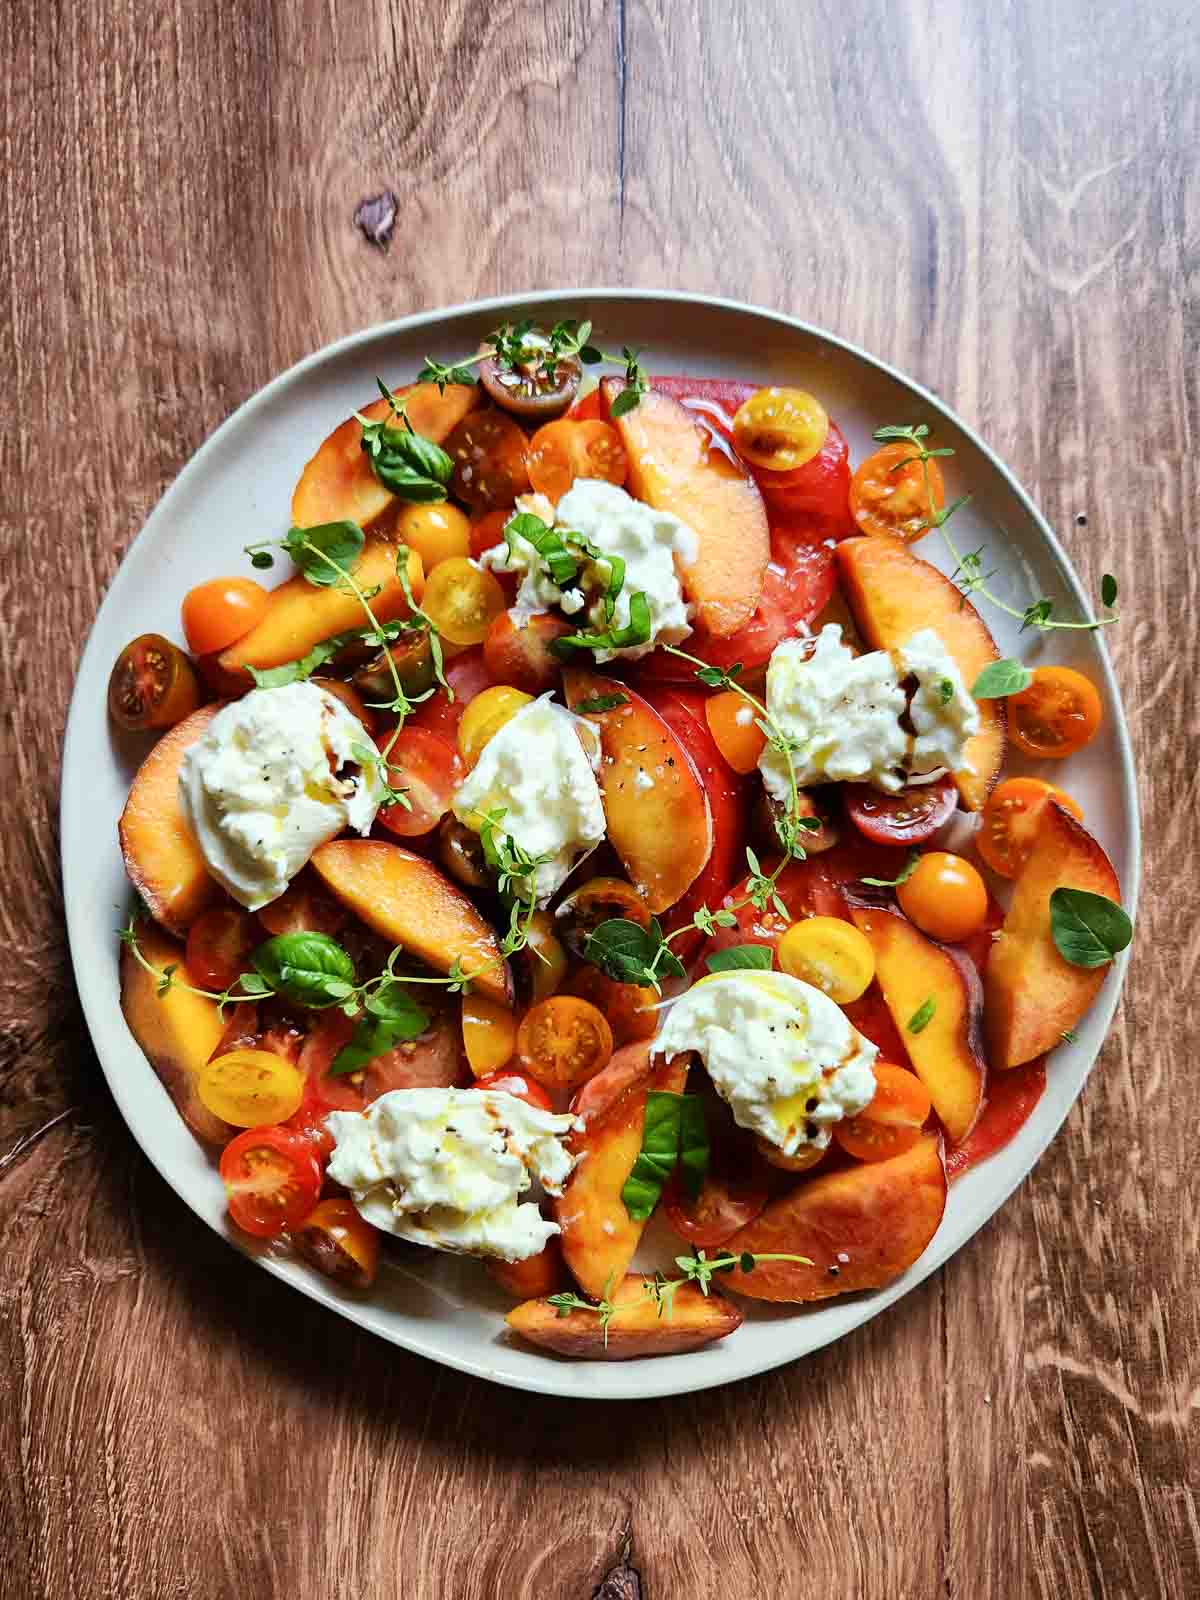 Tomatoes, peaches, and burrata on a salad plate.